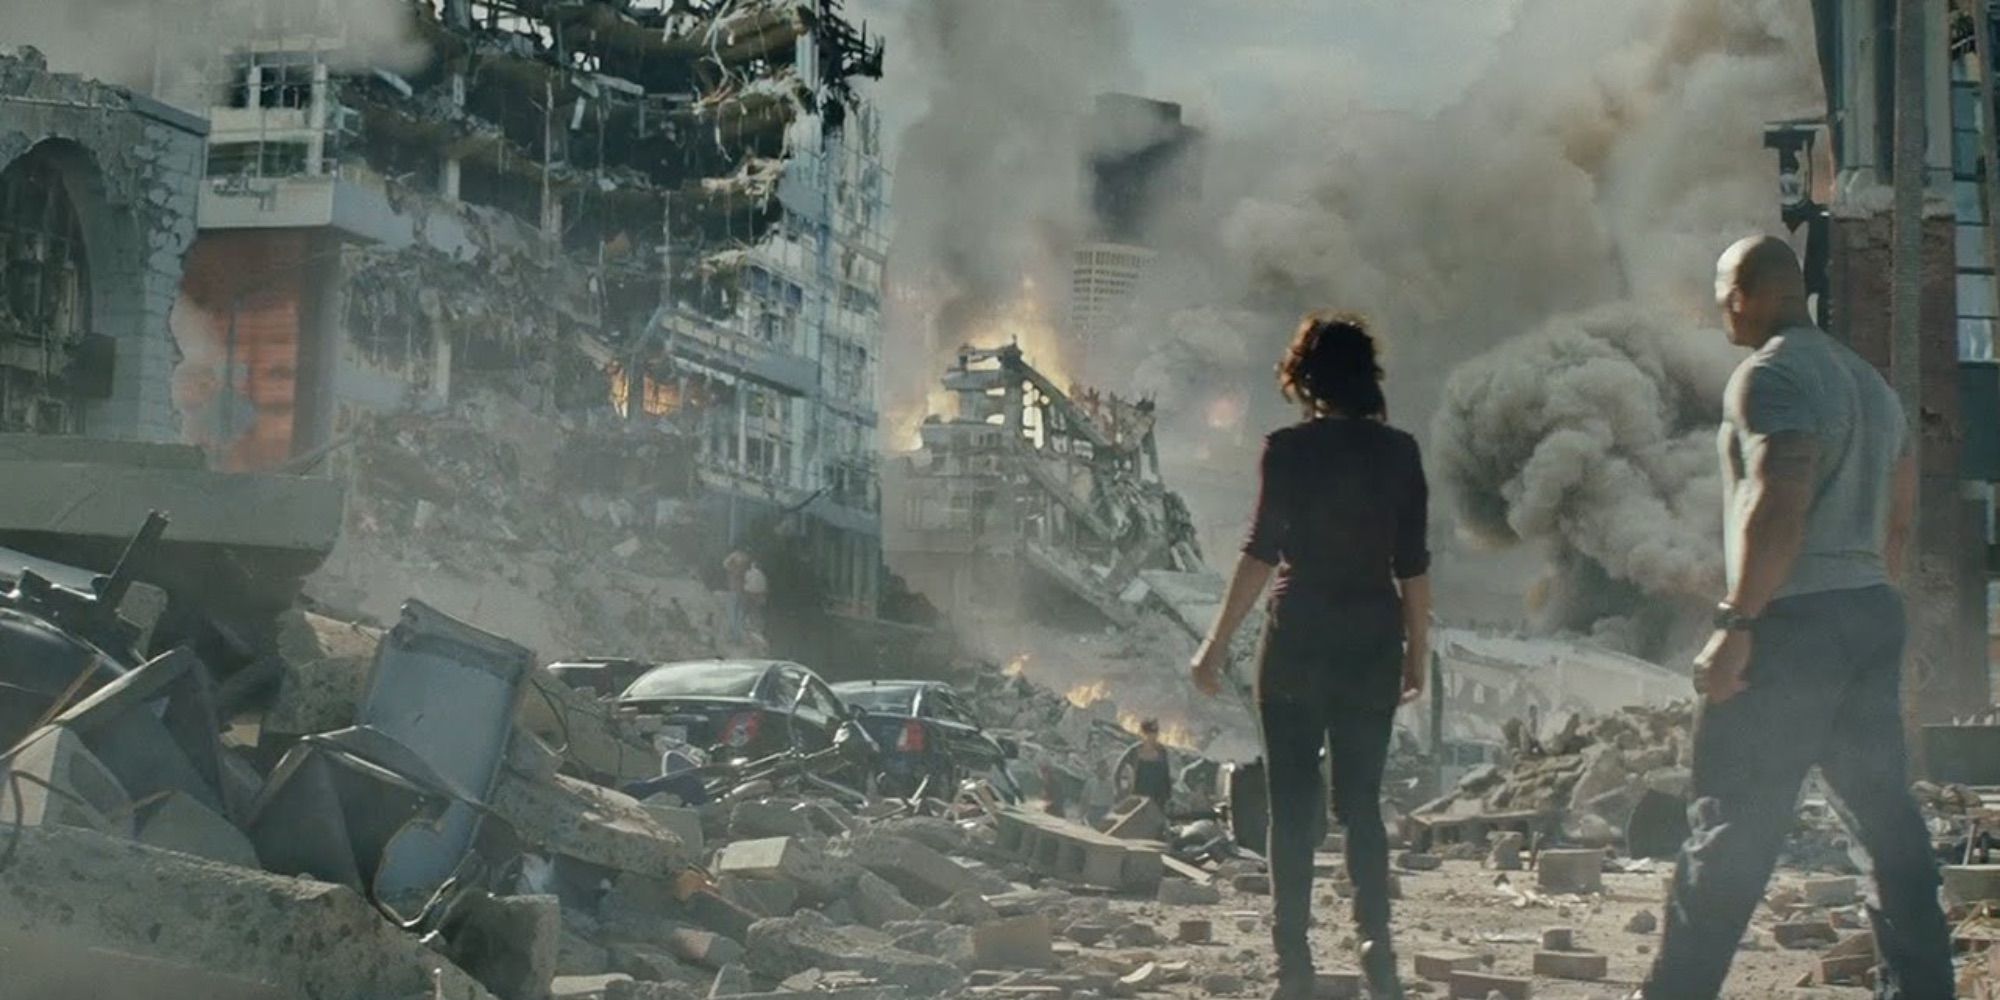 A man and woman look at a crumbled city in the aftermath of an earthquake